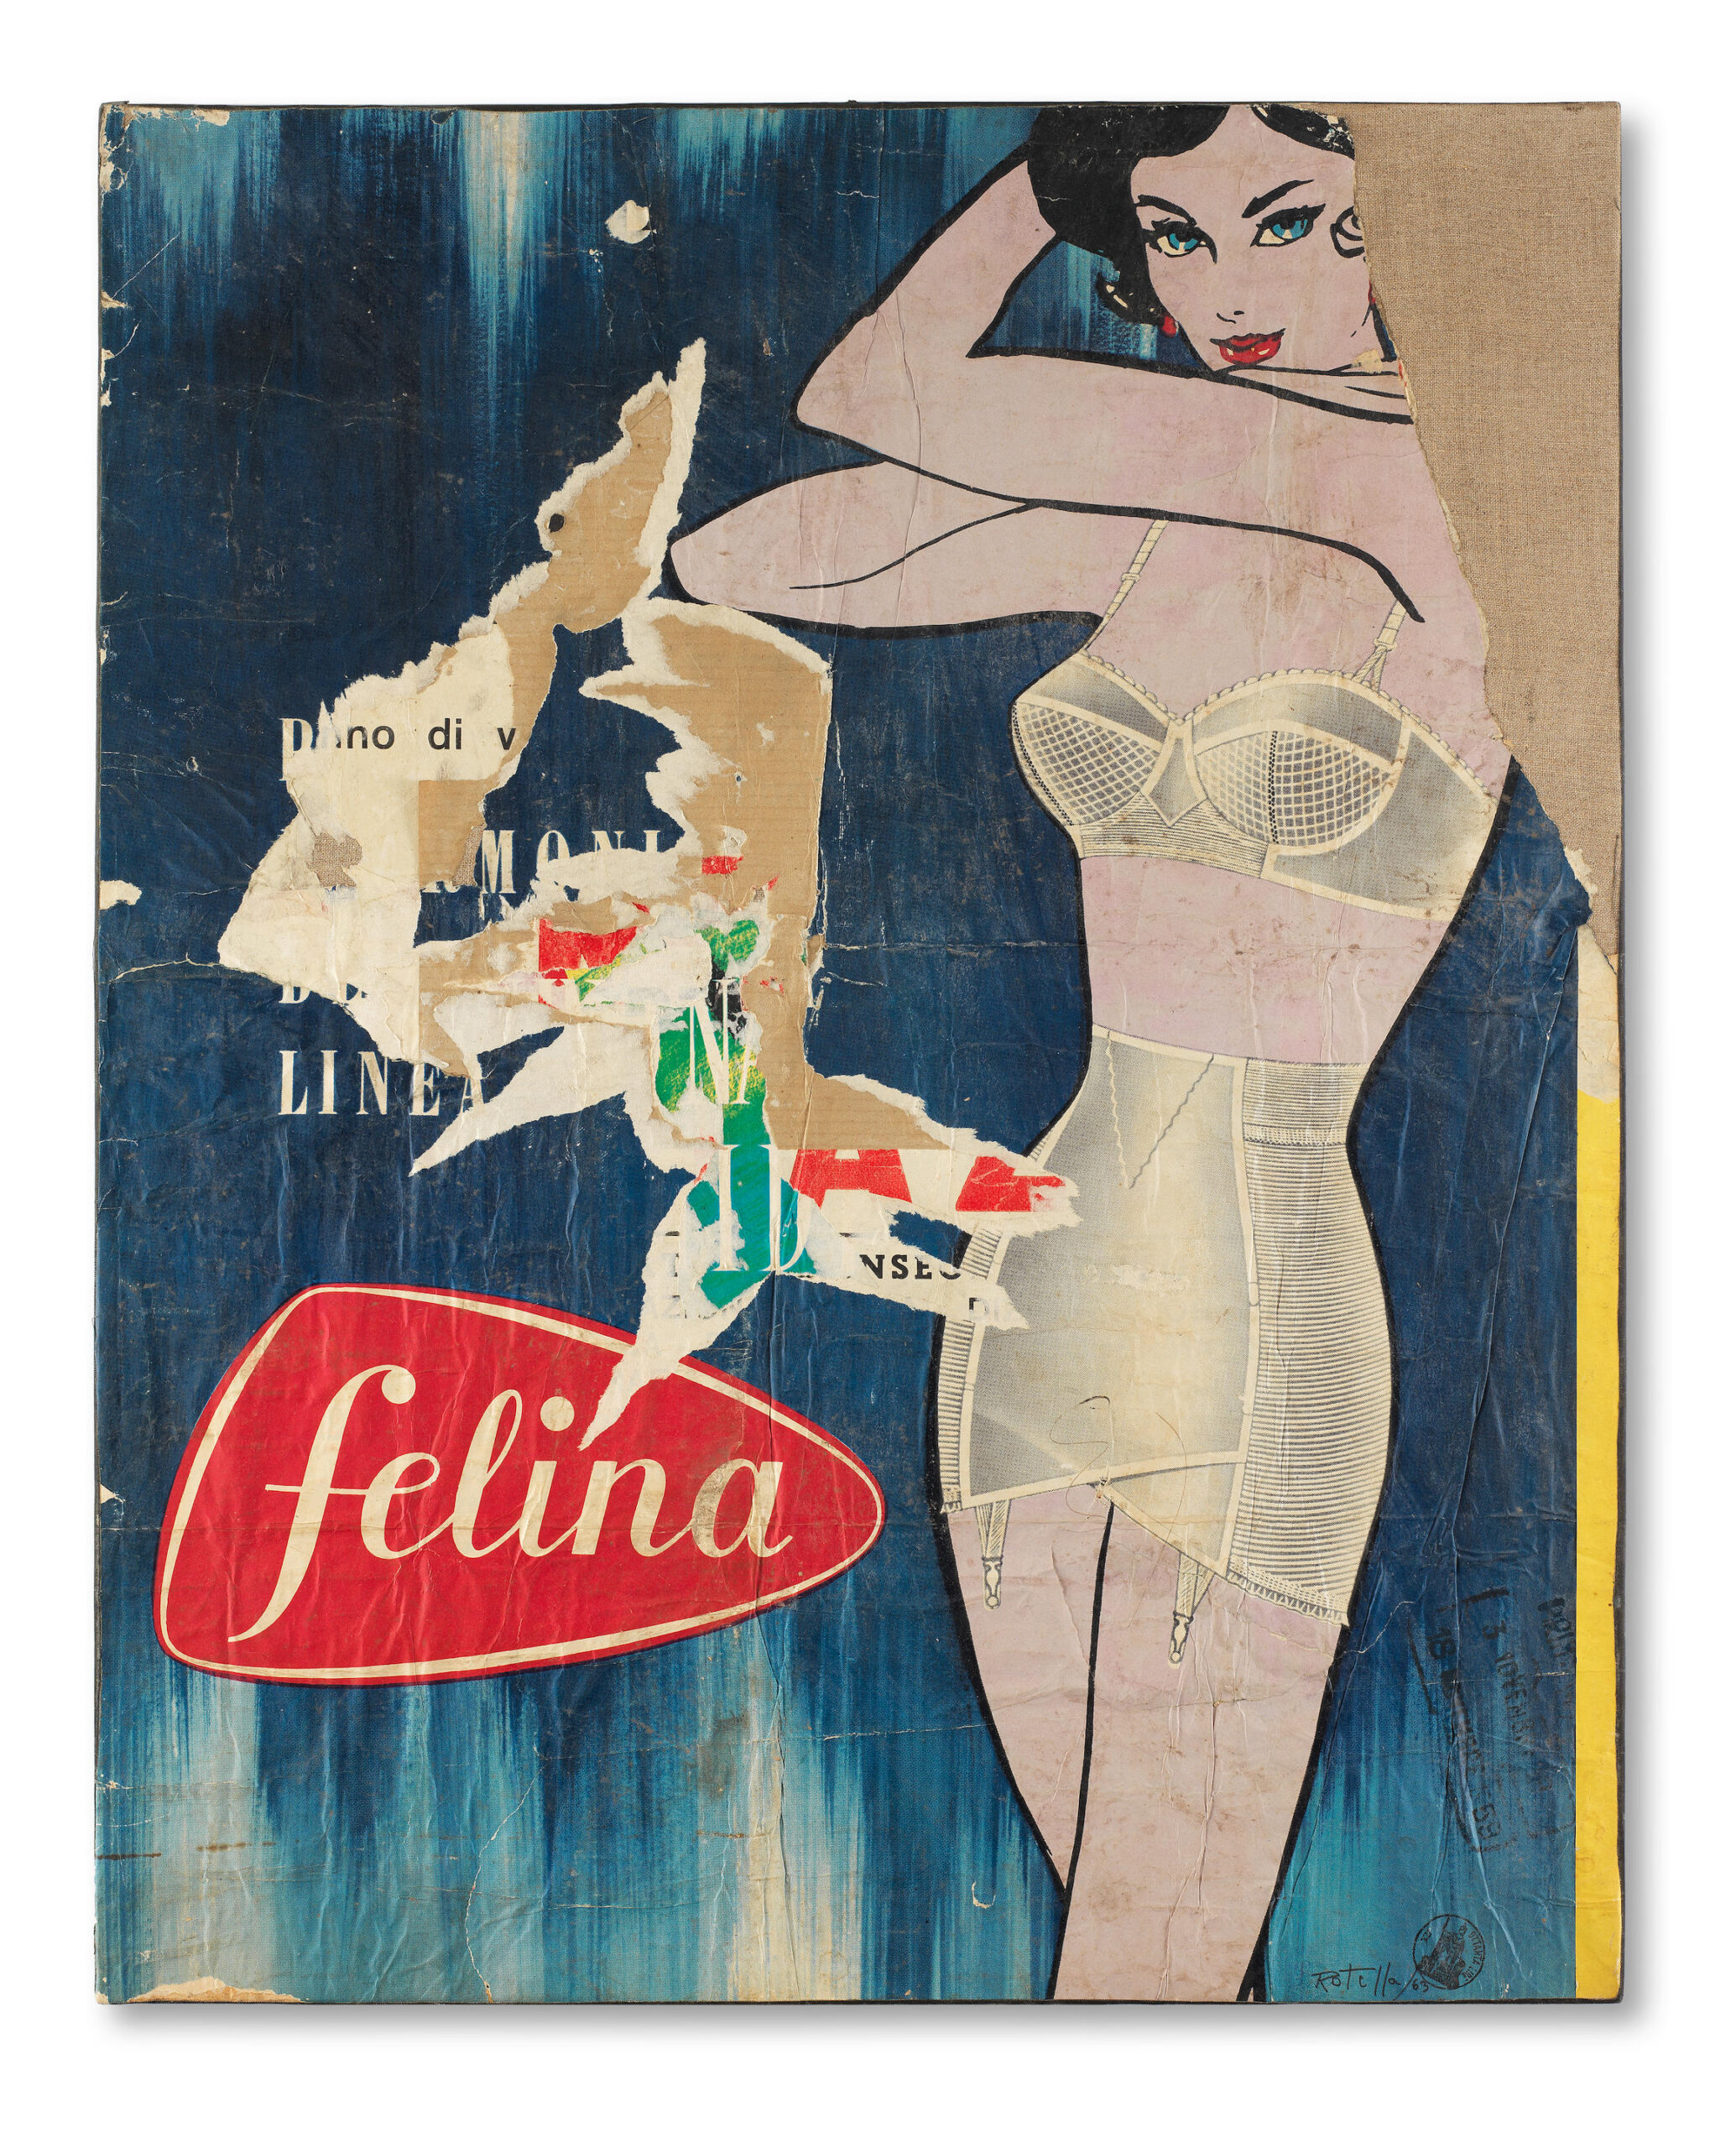 About the Artwork Rotella Mimmo. Felina. 1963  by Mimmo Rotella